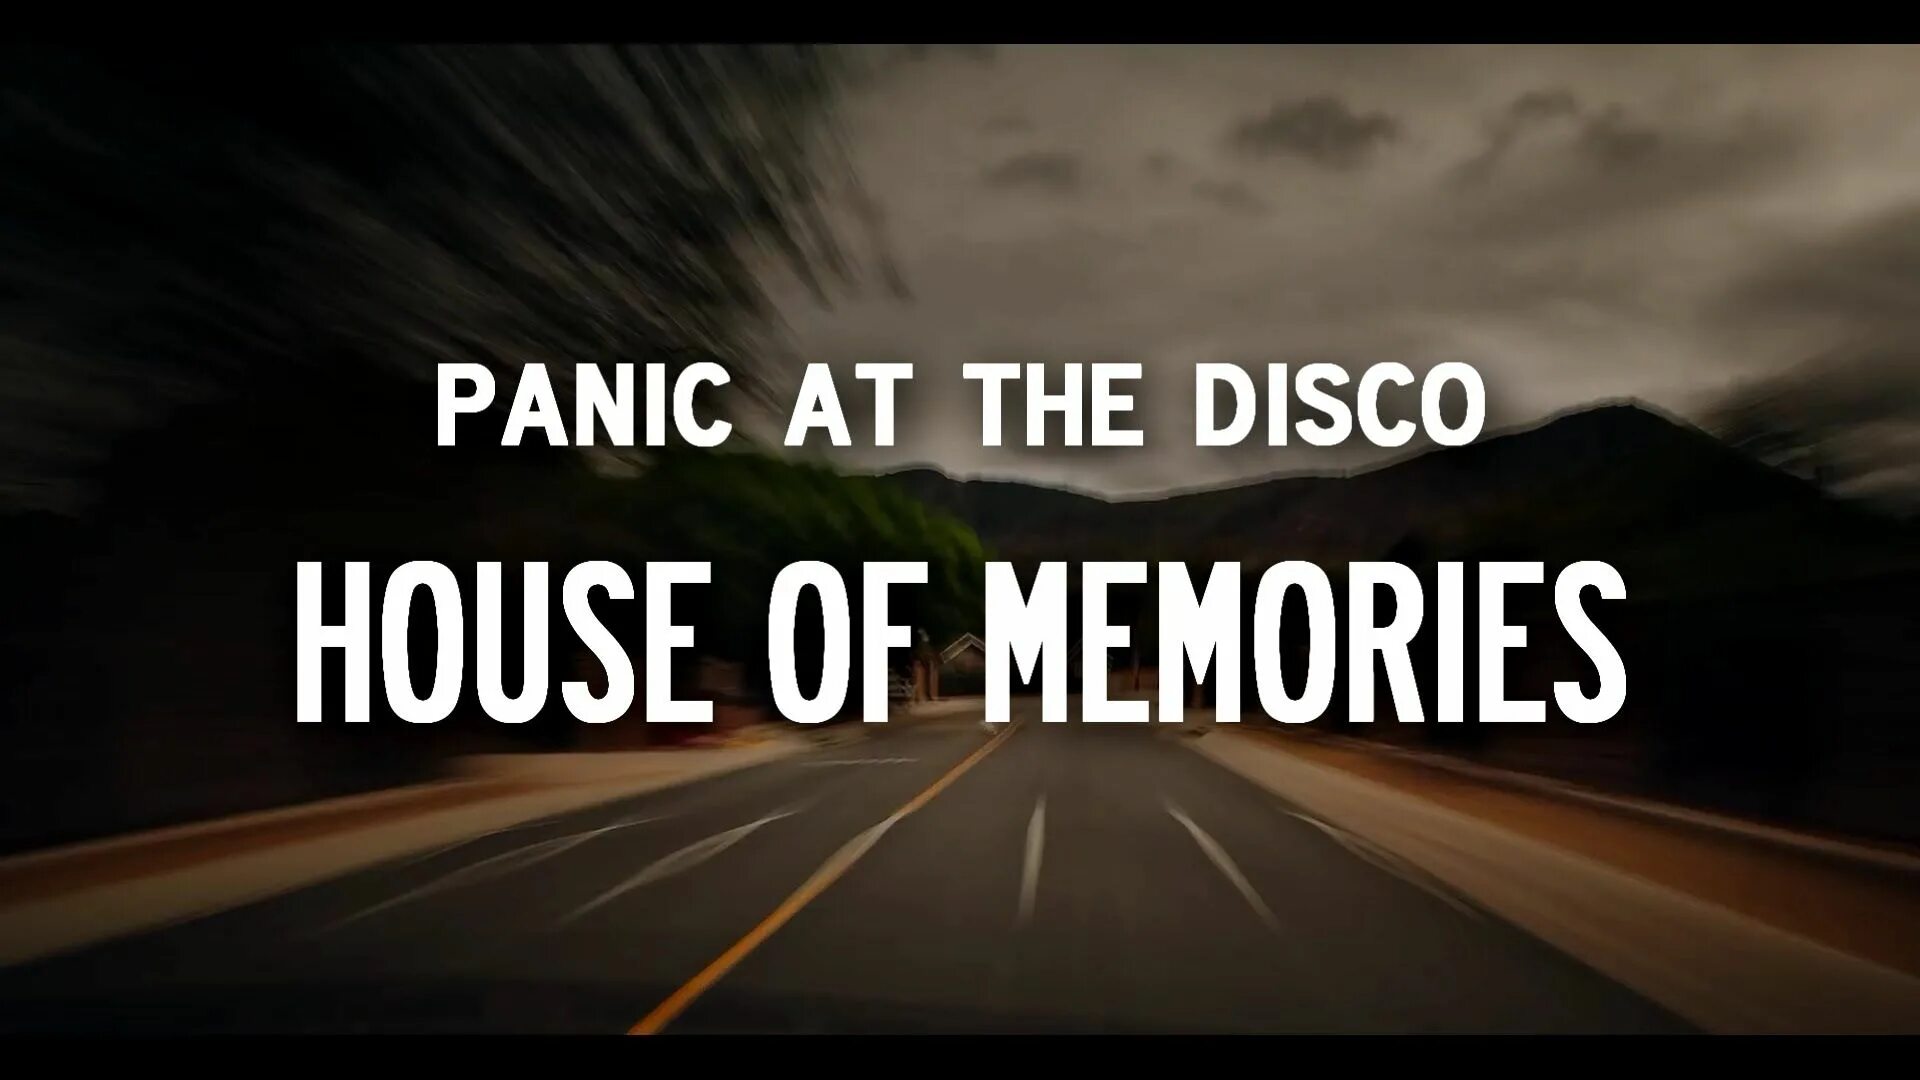 House of Memories Panic at the Disco. Panic of Disco!-House of Memories. House of m. Panic at the Disco House of Memories обложка. Песня me house